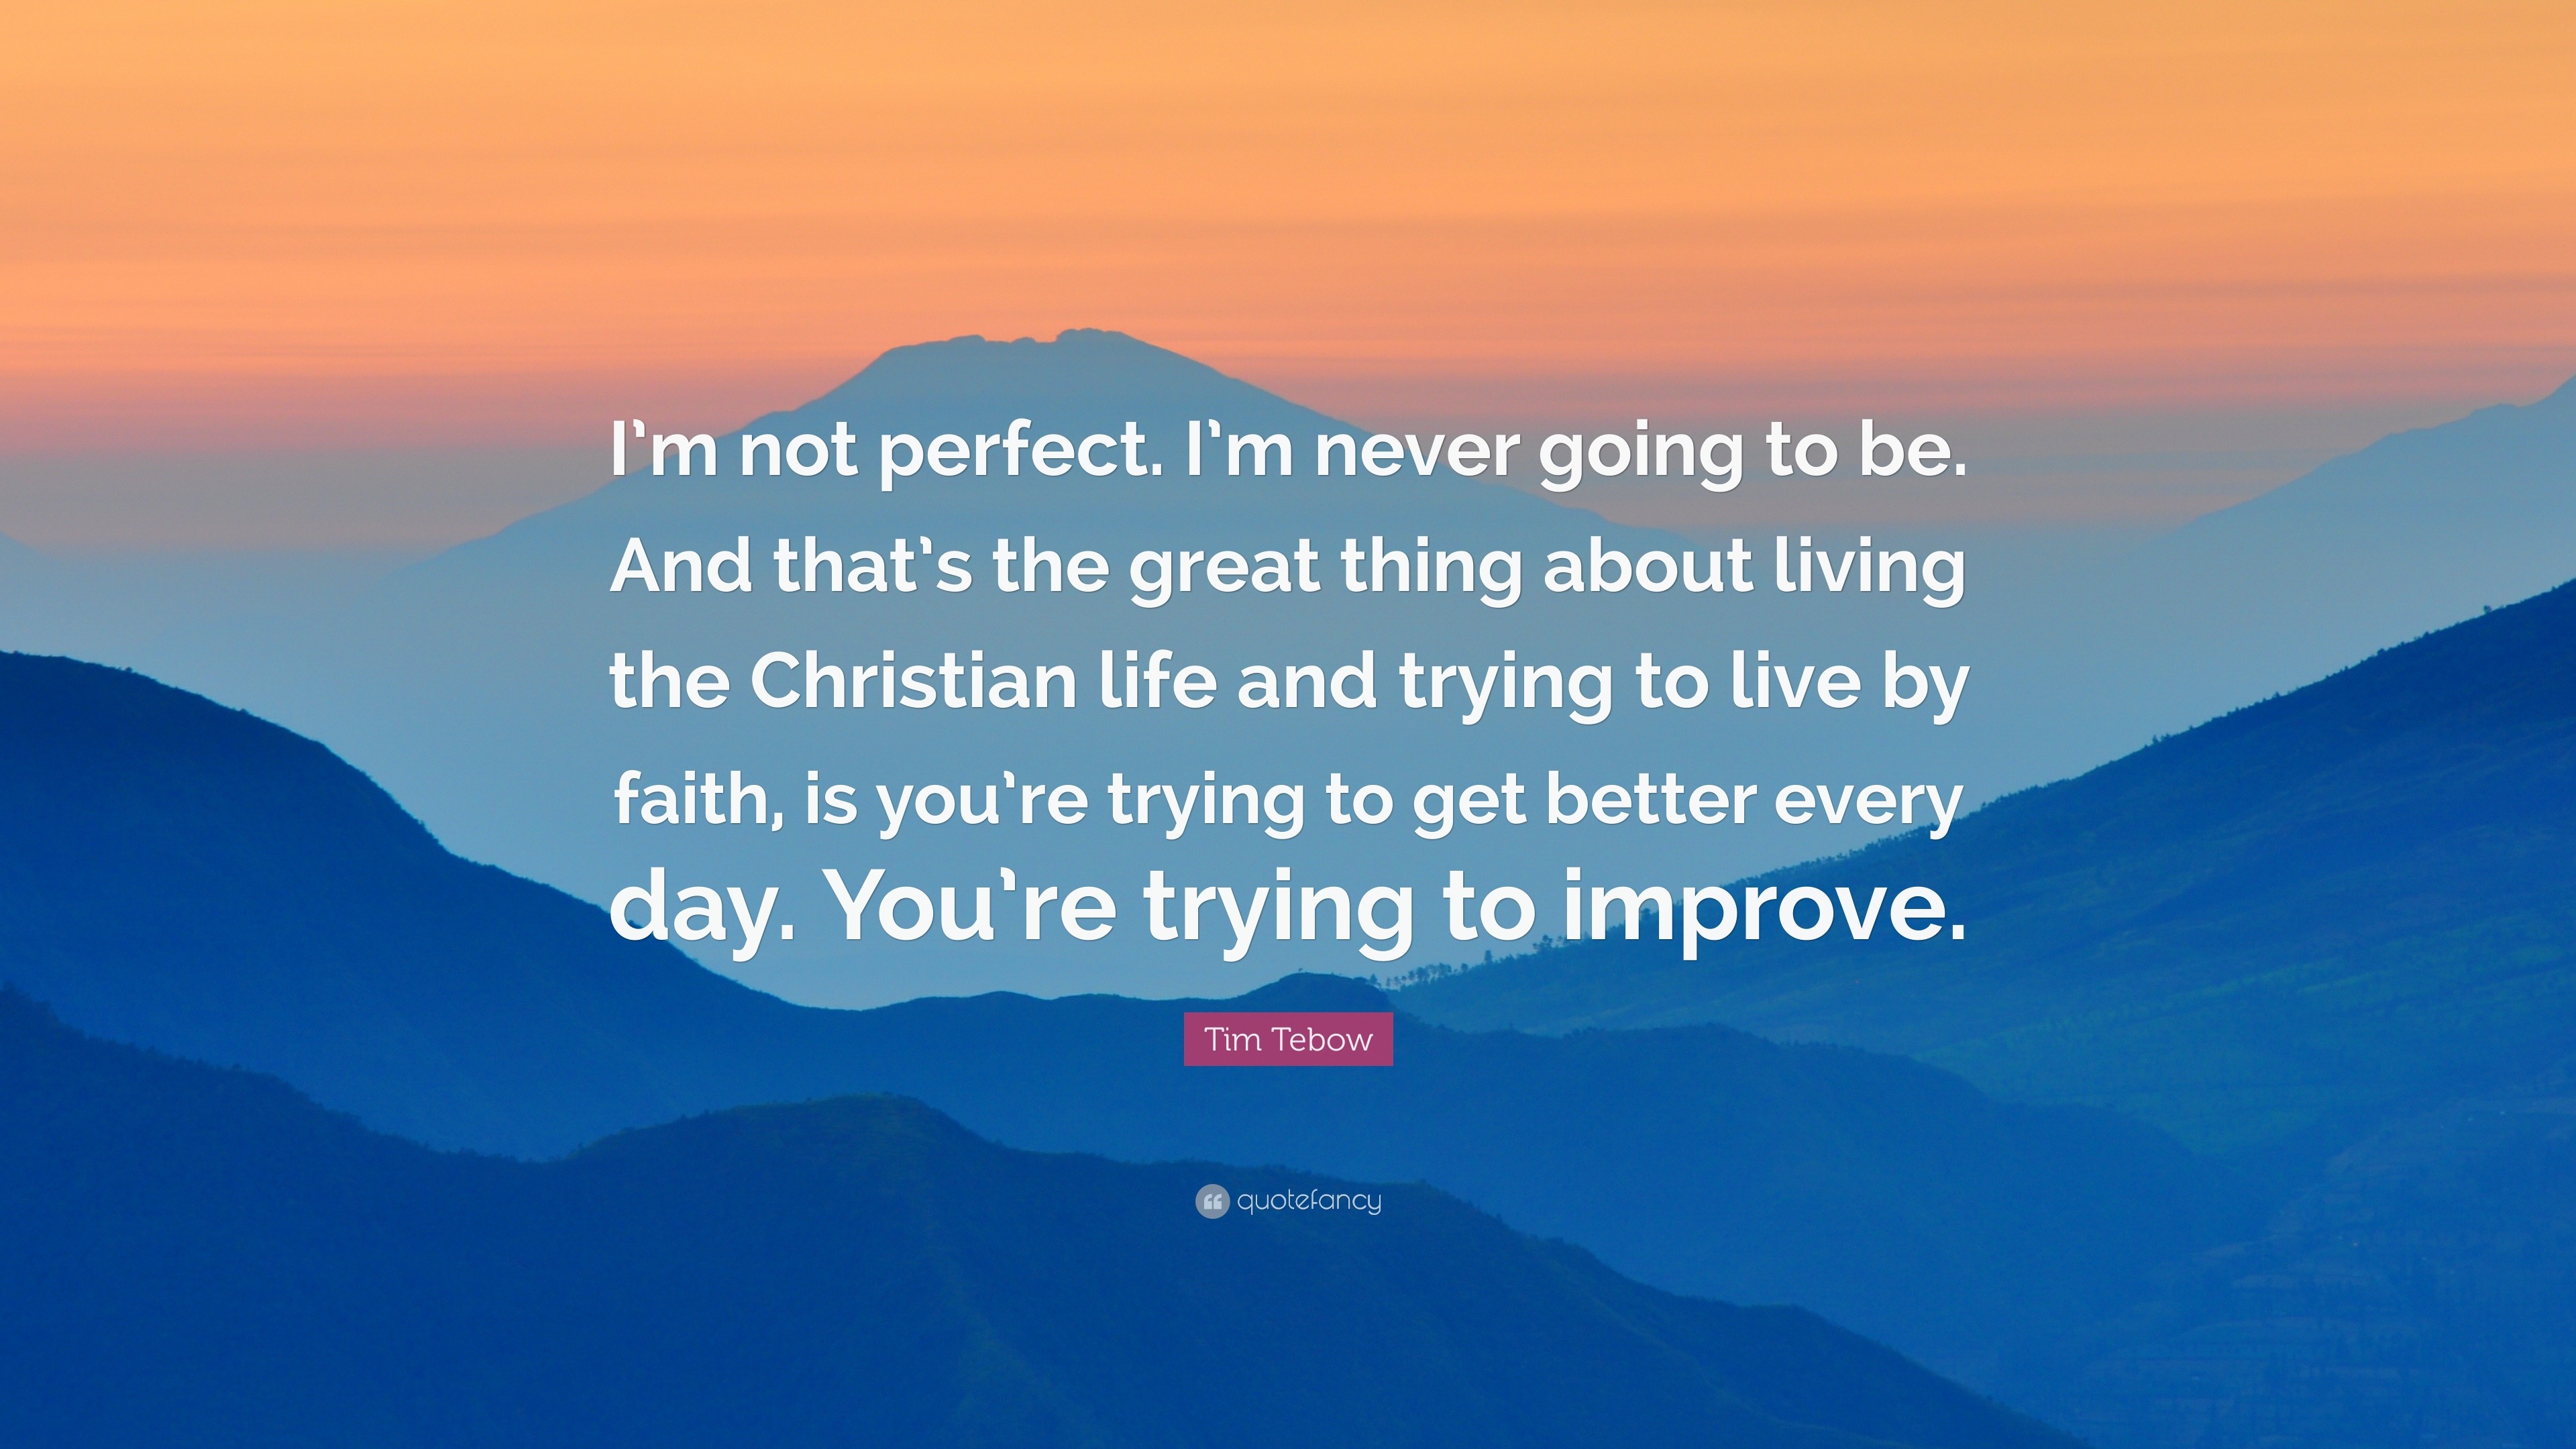 Tim Tebow Quote: “I’m not perfect. I’m never going to be. And that’s